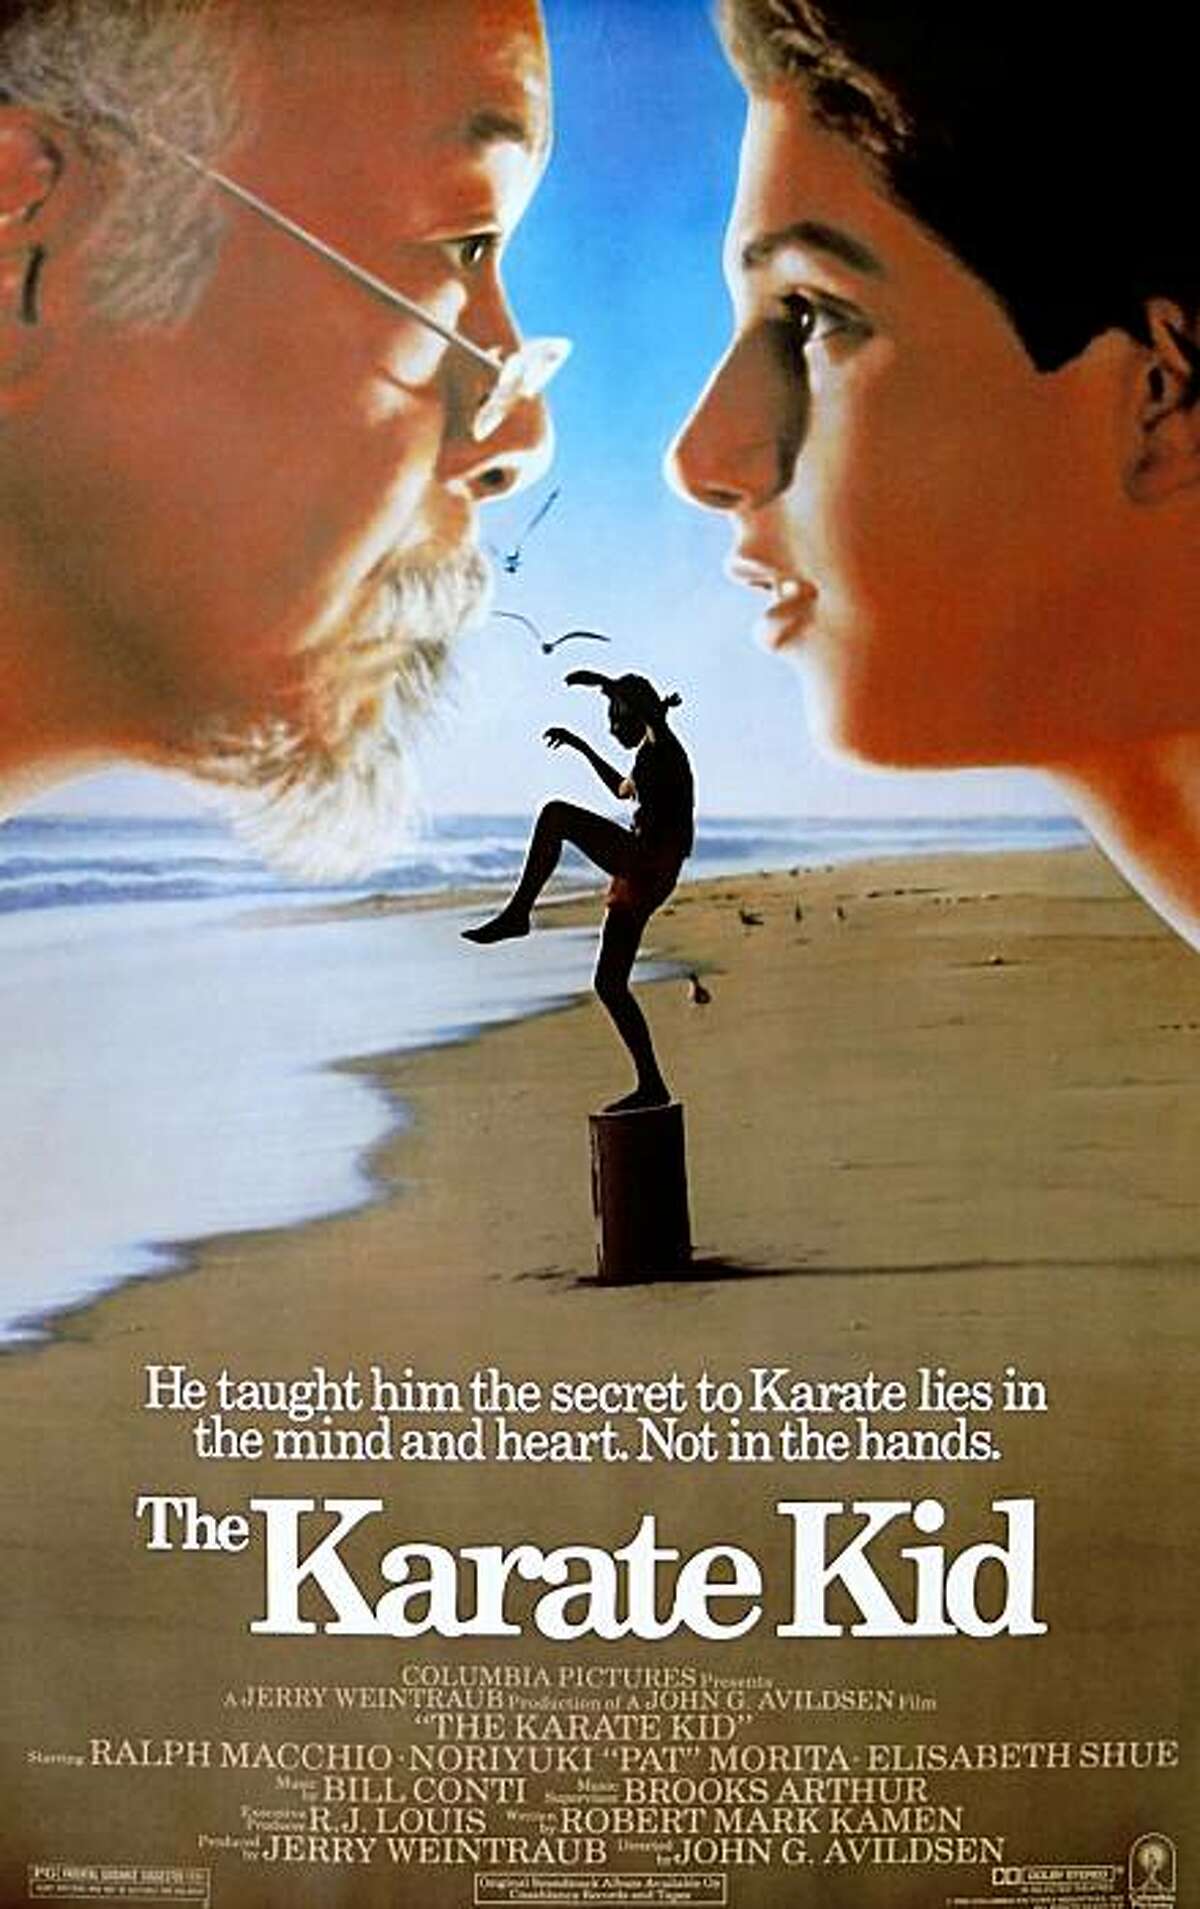 Poster for the original "The Karate Kid" (1984).